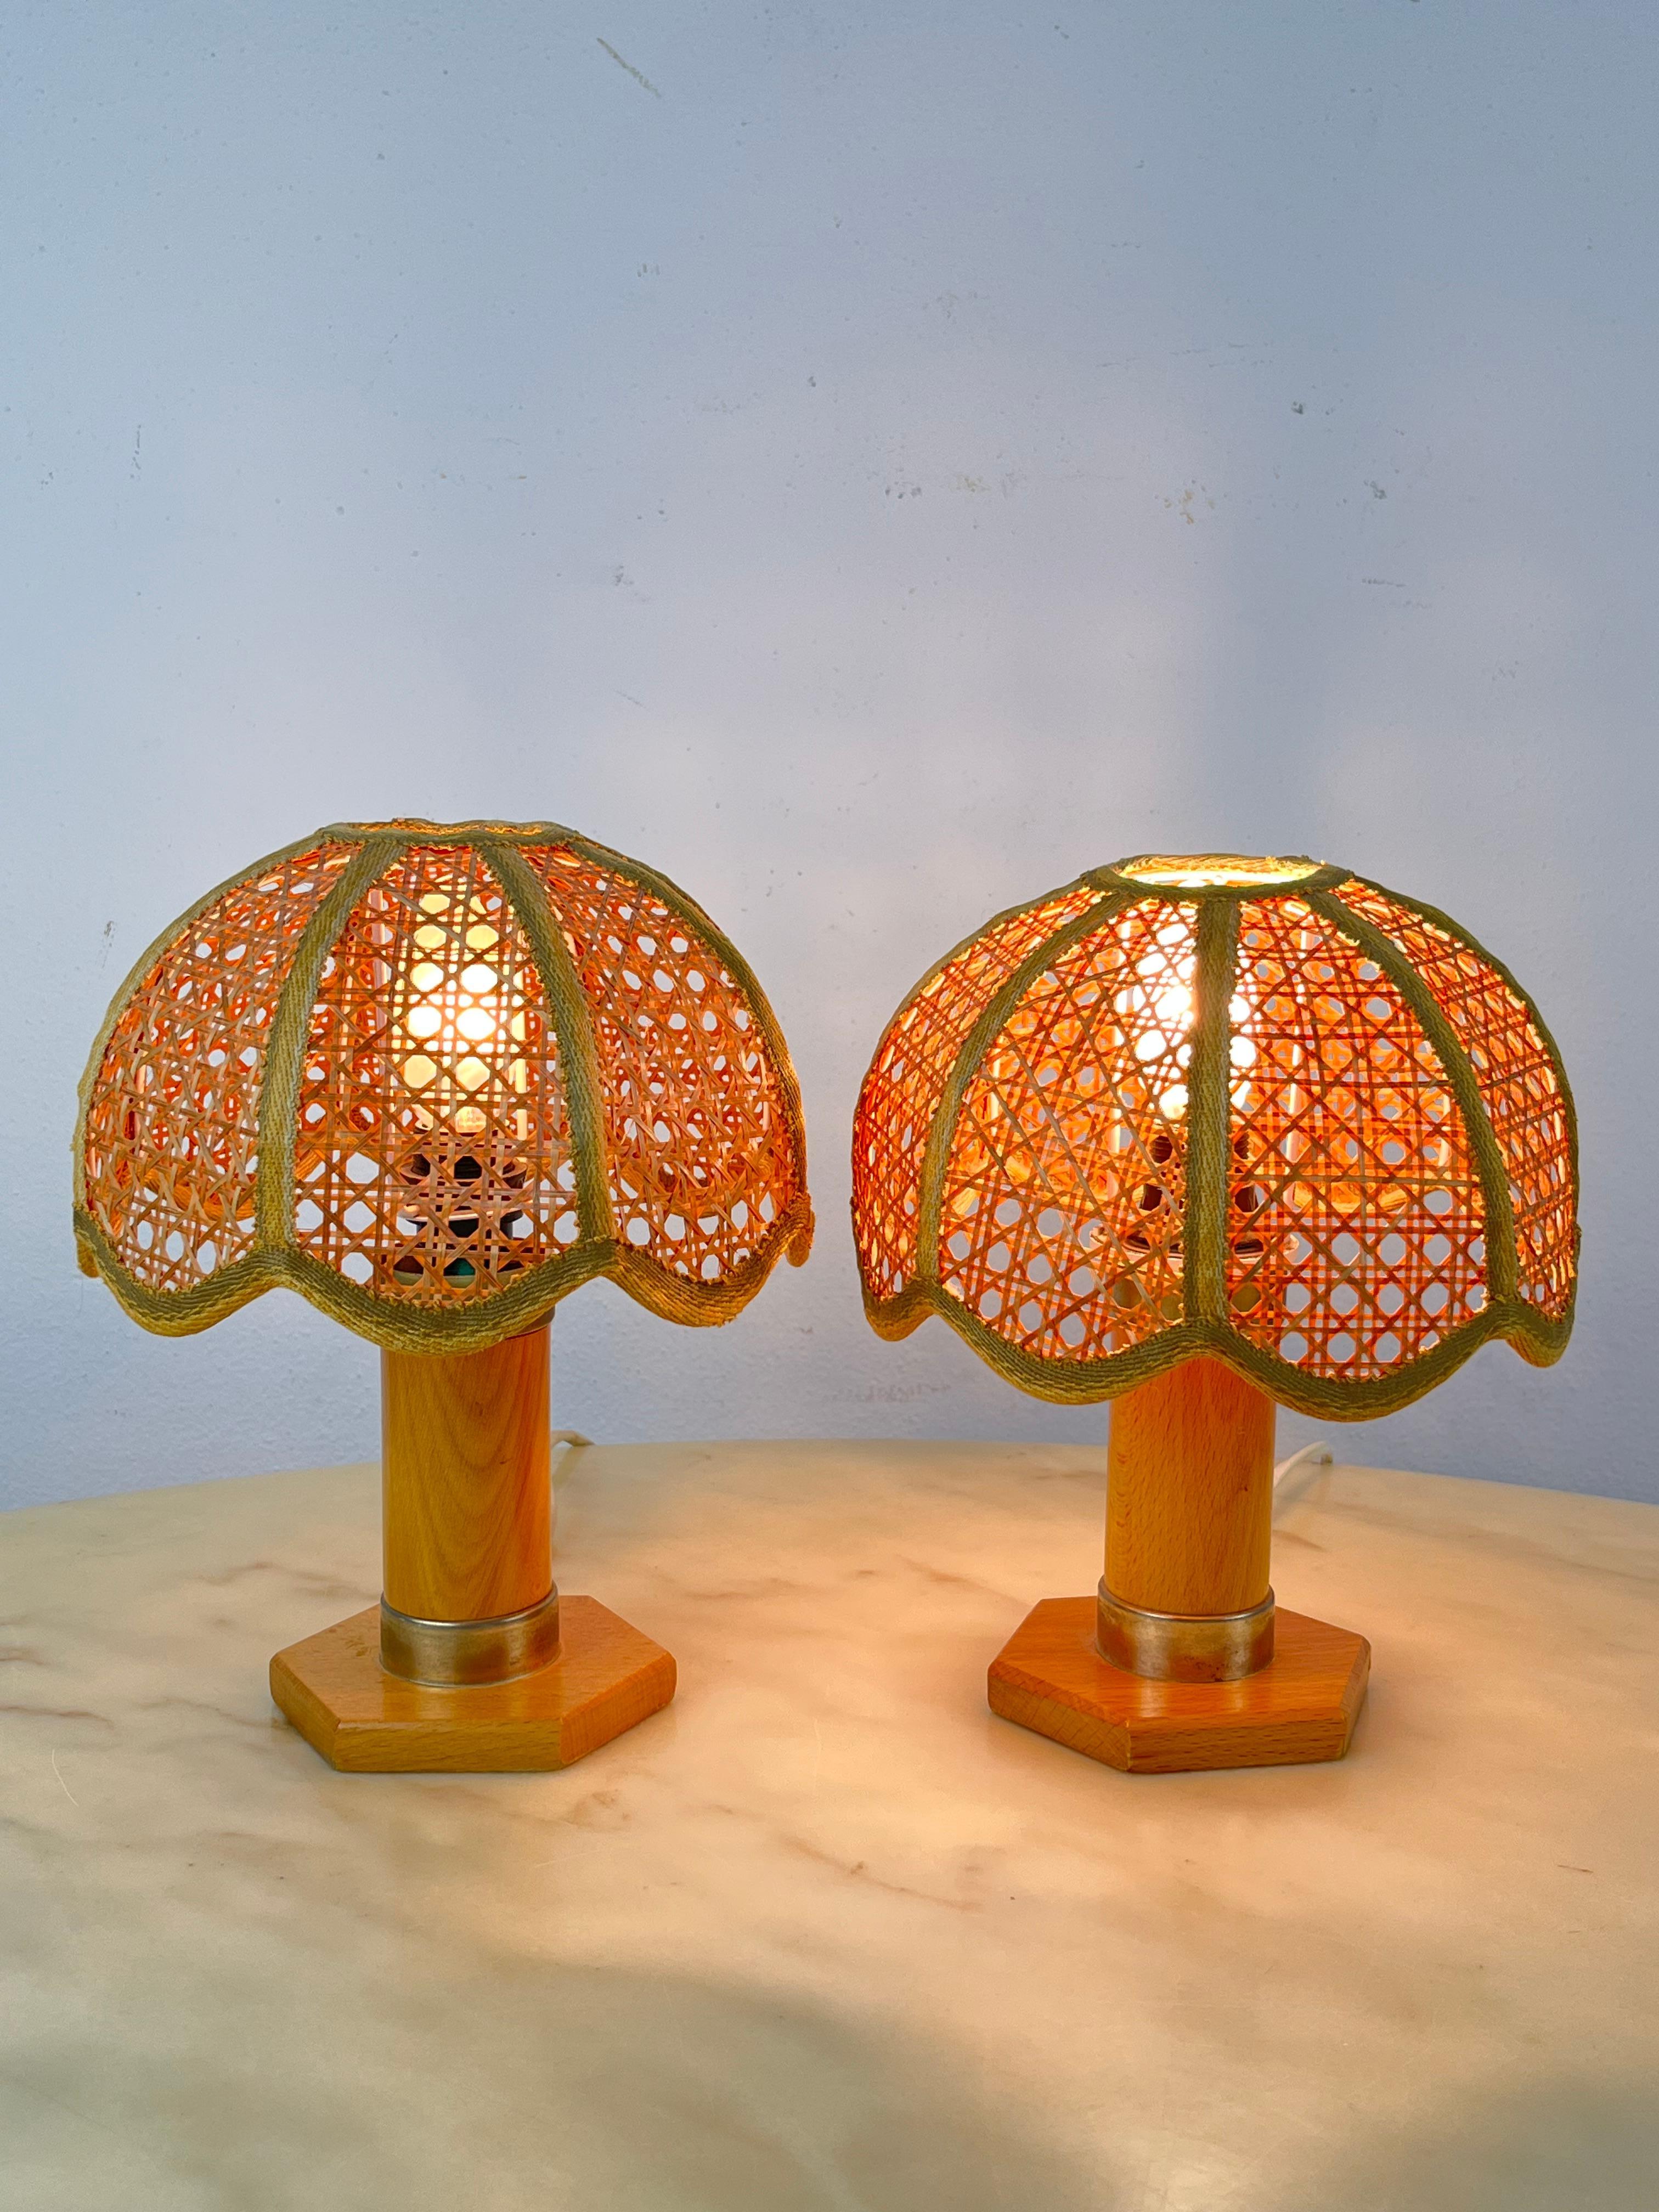 Wonderful pair of mid century wicker and rattan table lamps. These lovely French Riviera style table lamps were designed and made in Italy in the 1960s. Completely handcrafted with perfect proportions, mixing curved rattan, hand-woven Vienna straw